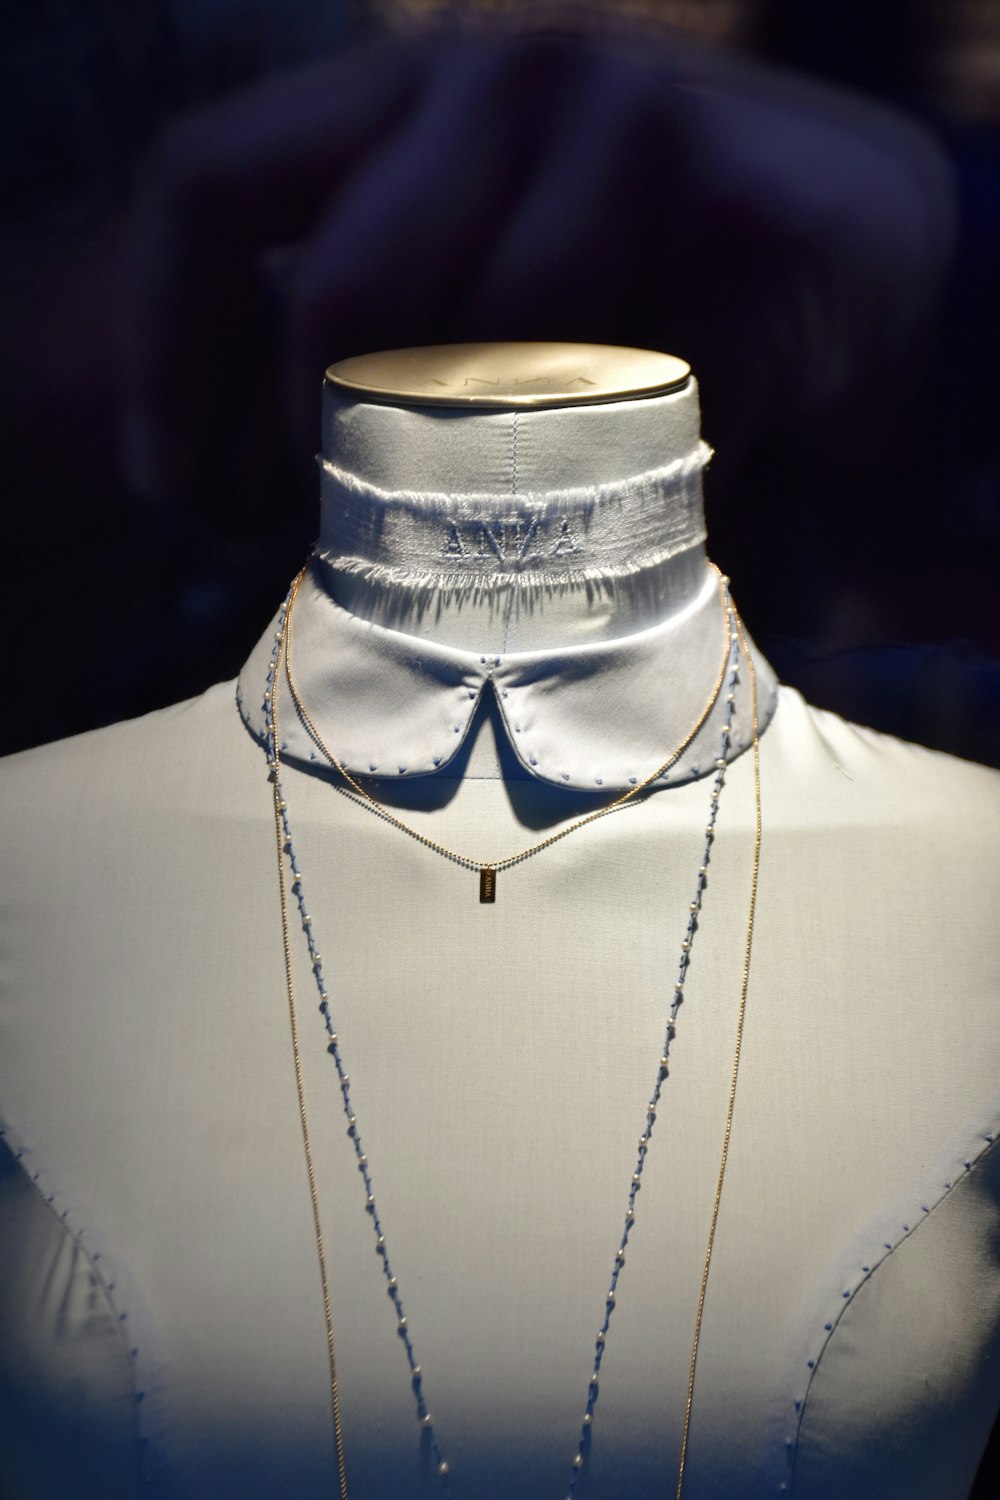 a mannequin wearing a white shirt and a necklace